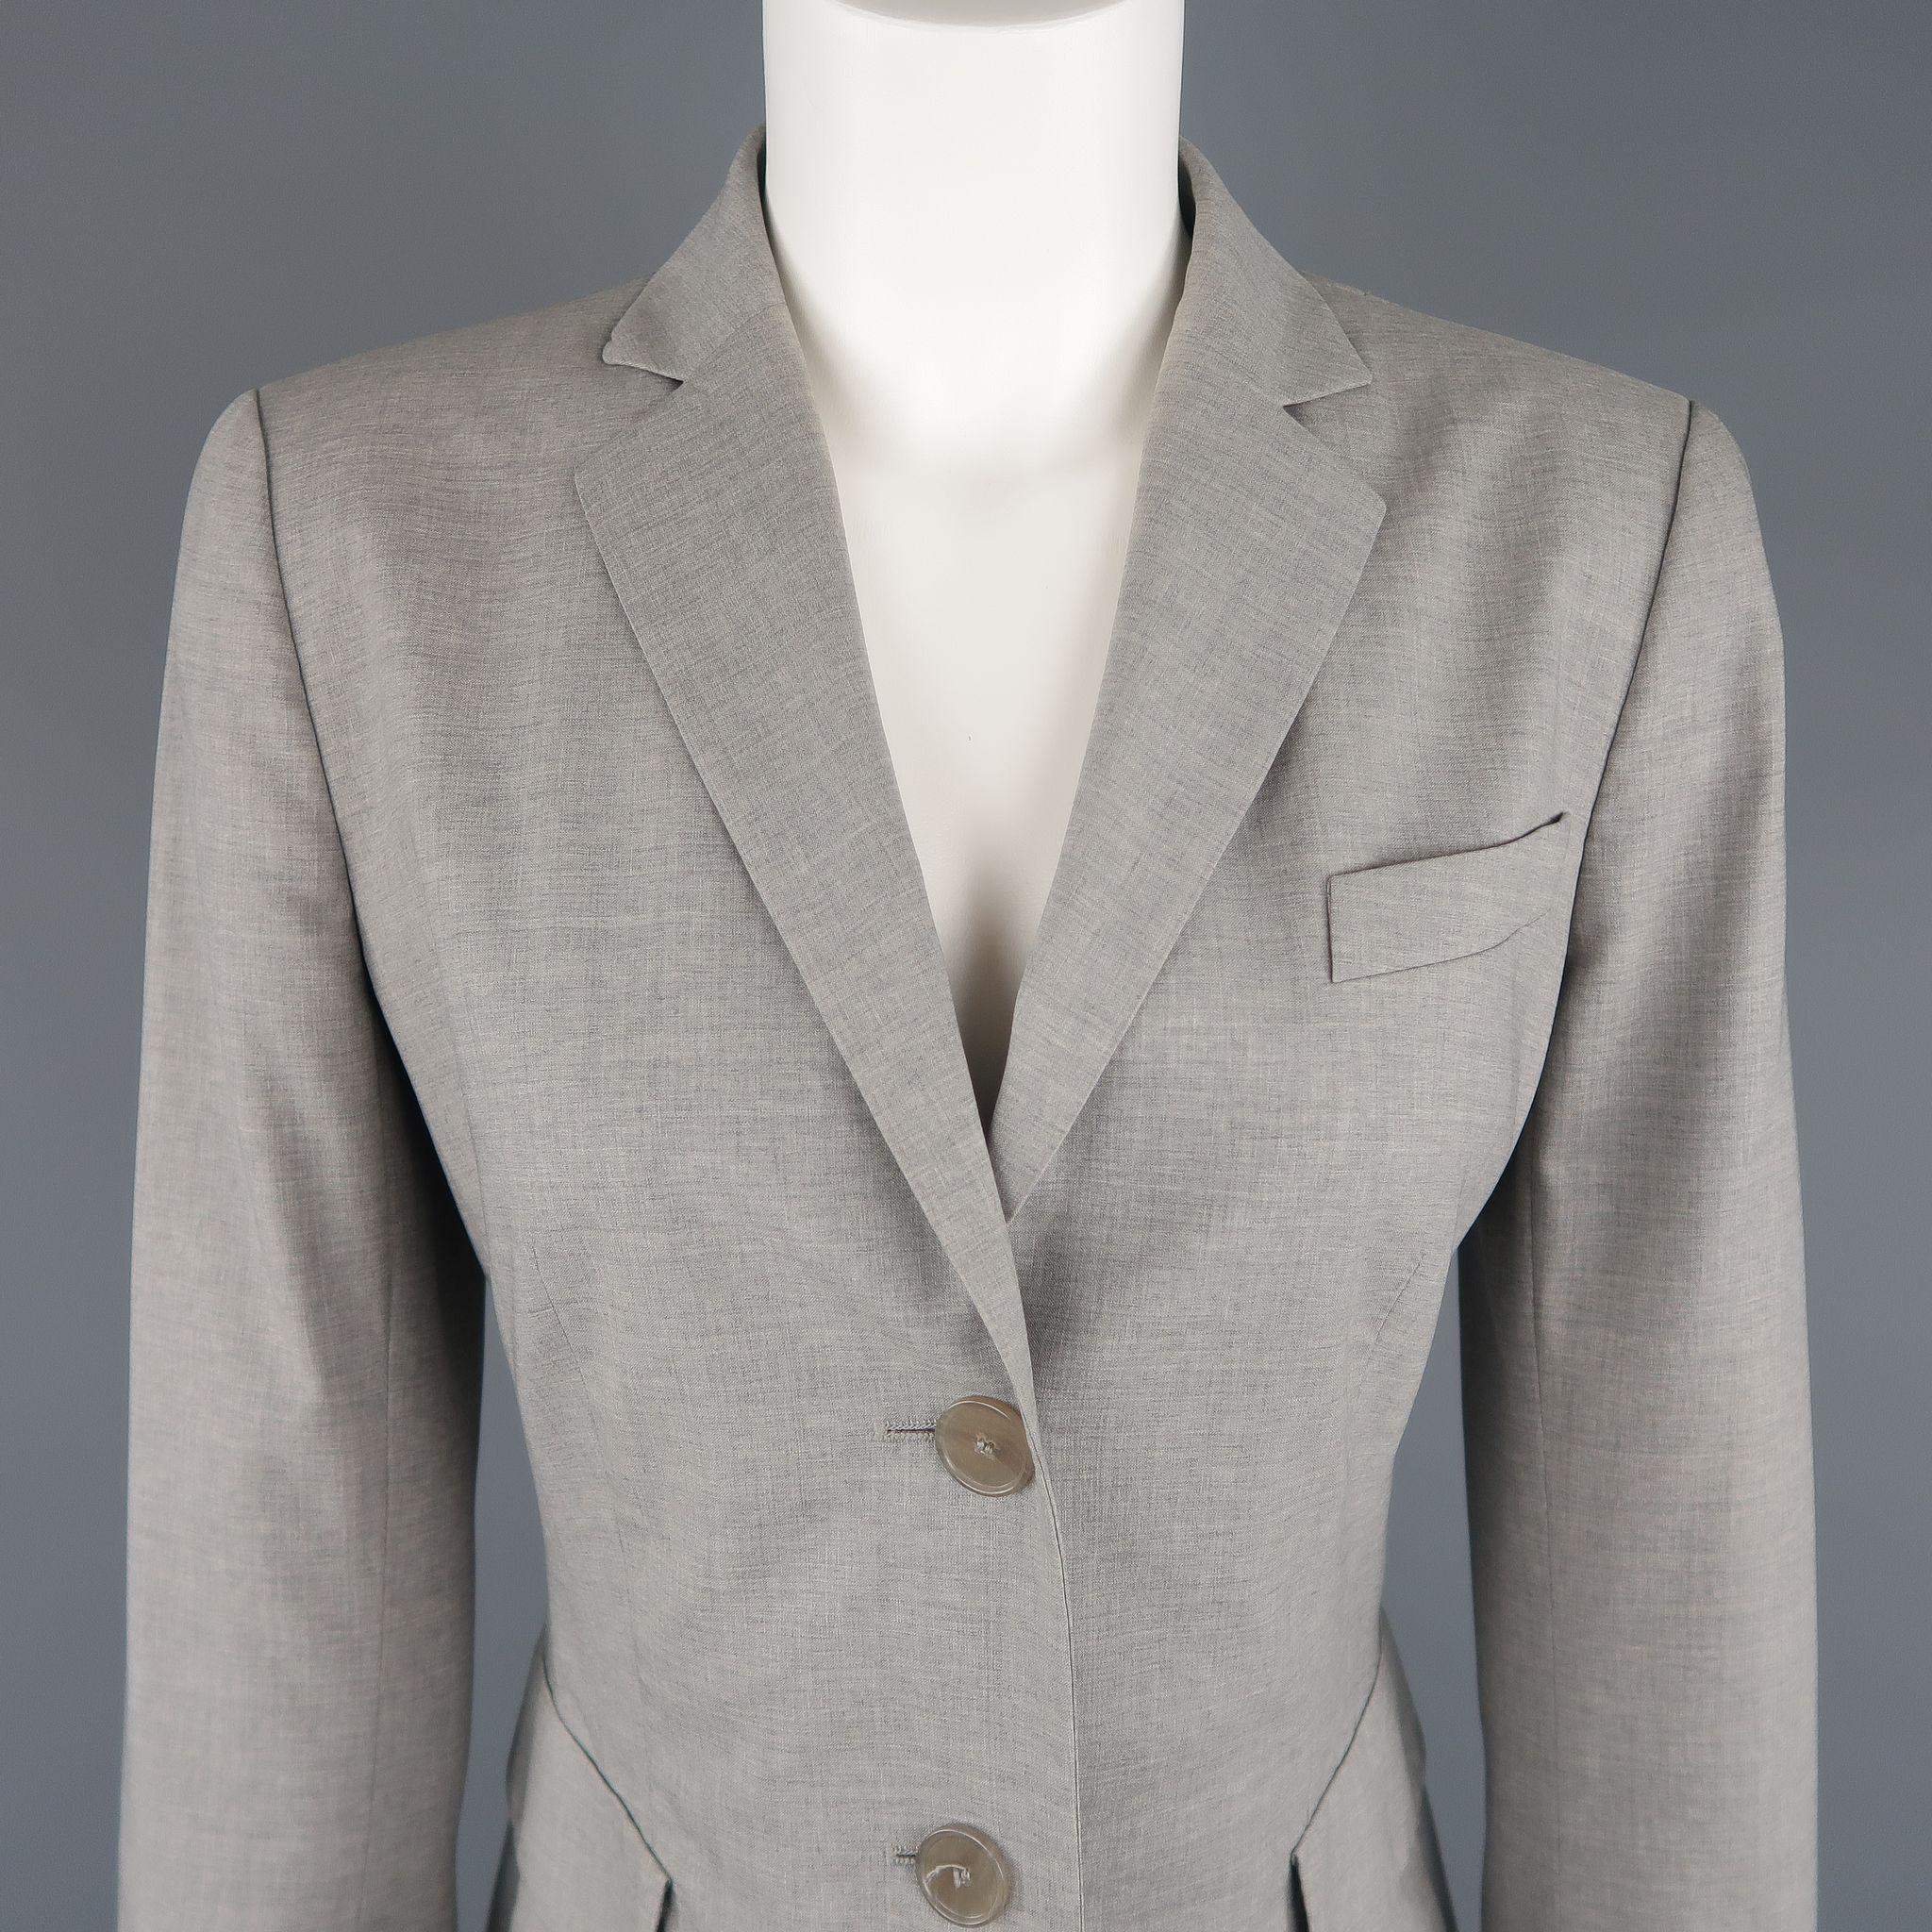 AKRIS long sport coat comes in light weight heather gray acetate blend fabric with a notch lapel, single breasted three button closure, flap pockets, and slit cuffs. Made in Switzerland.

Excellent Pre-Owned Condition.
Marked: US